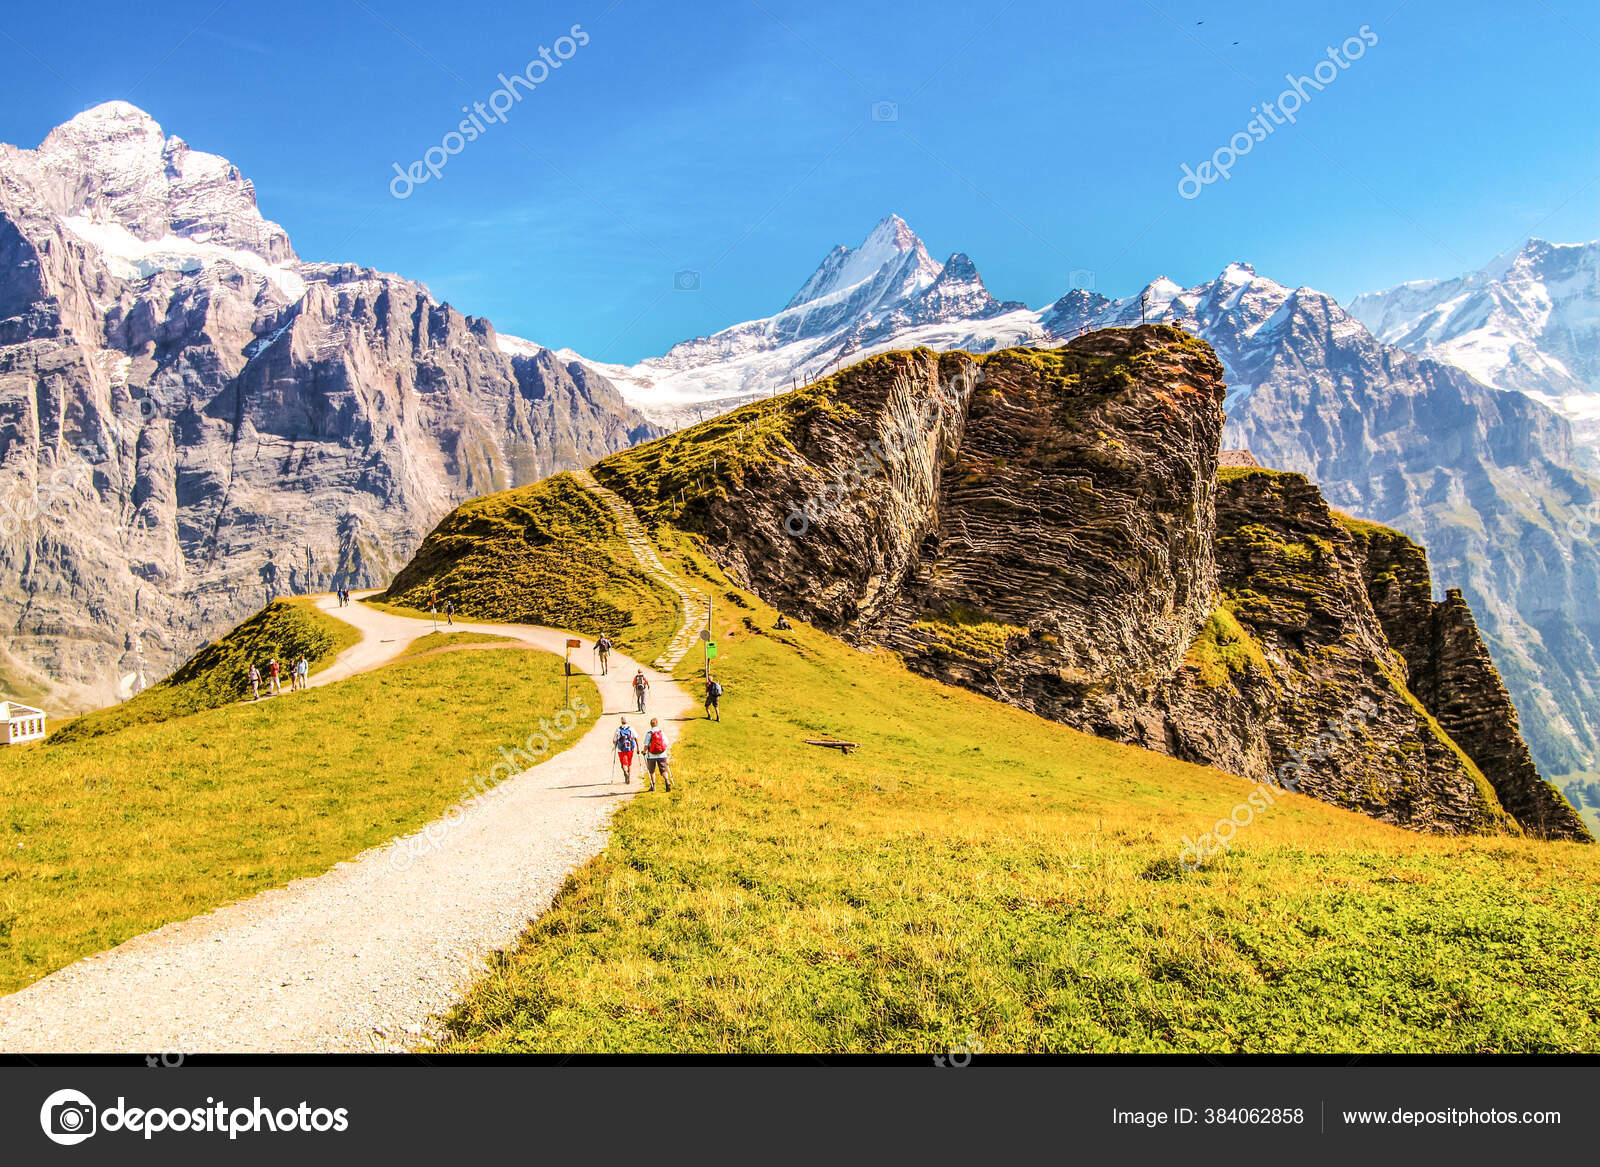 Grindelwald First Very Popular Place Nature Switzerland Weather Good Summer Stock Photo By C Bananashake11 Hotmail Com